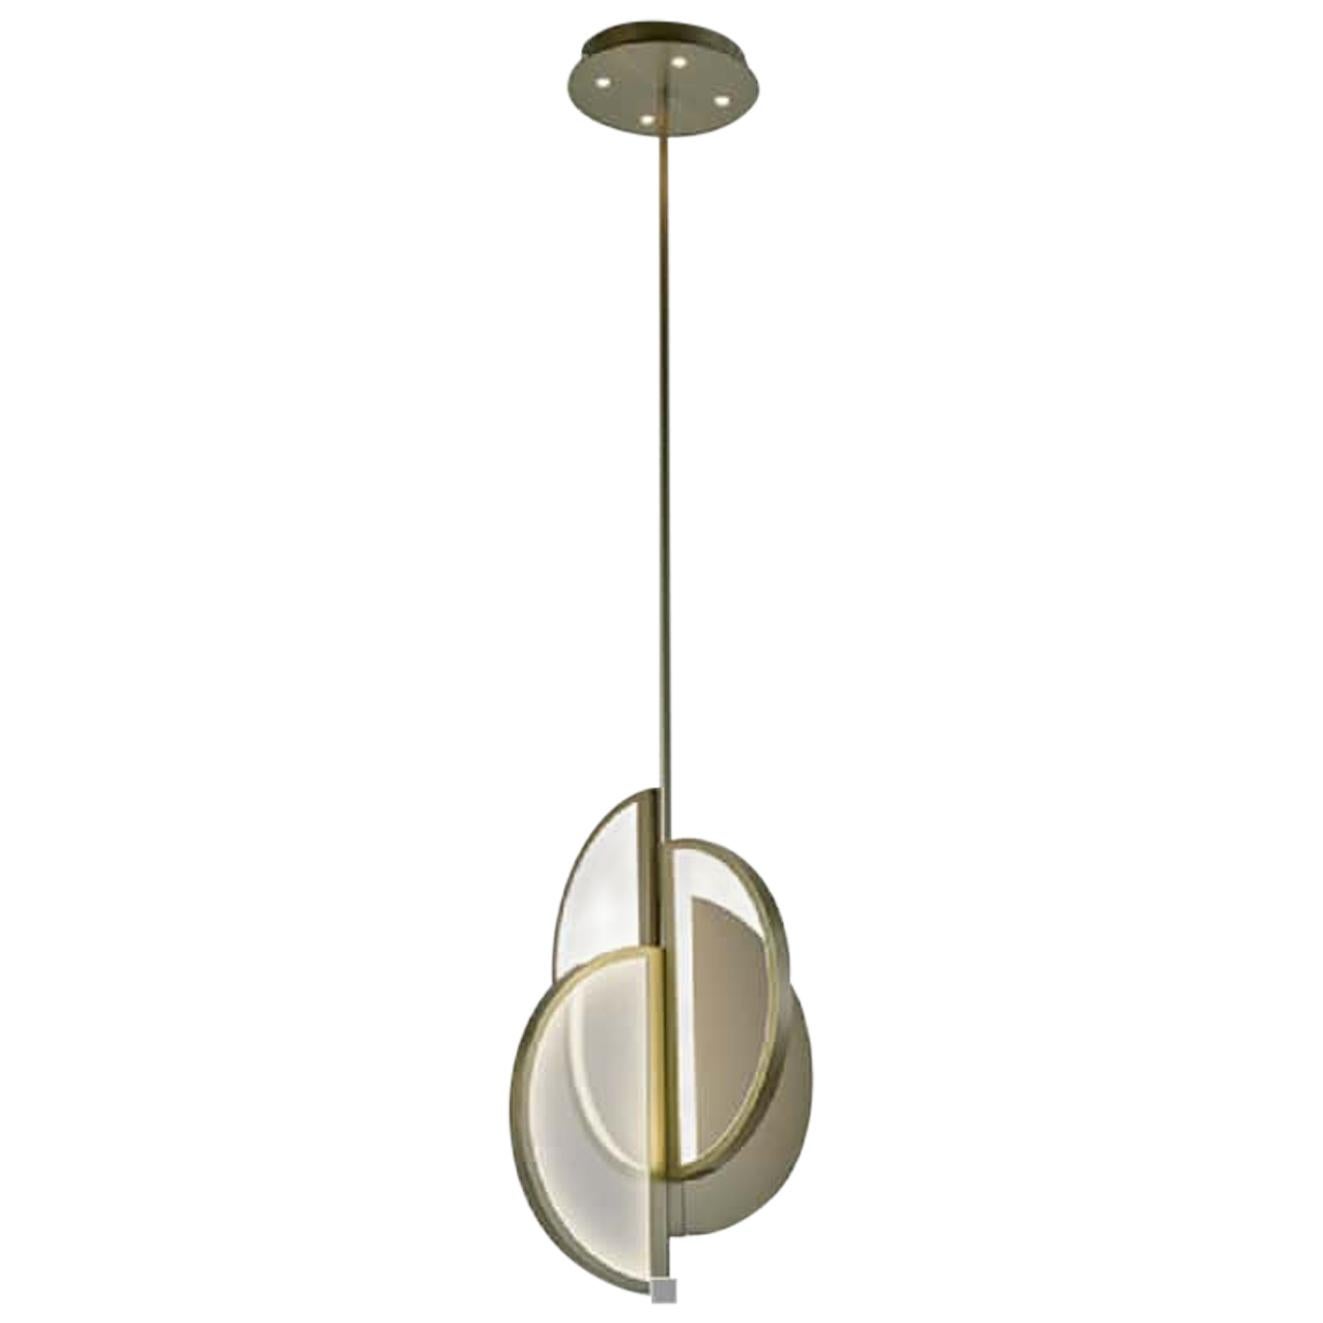 Beautiful Ceiling Lamp Brass Frame Champagne Finish O Brushed Nickel Fin For Sale